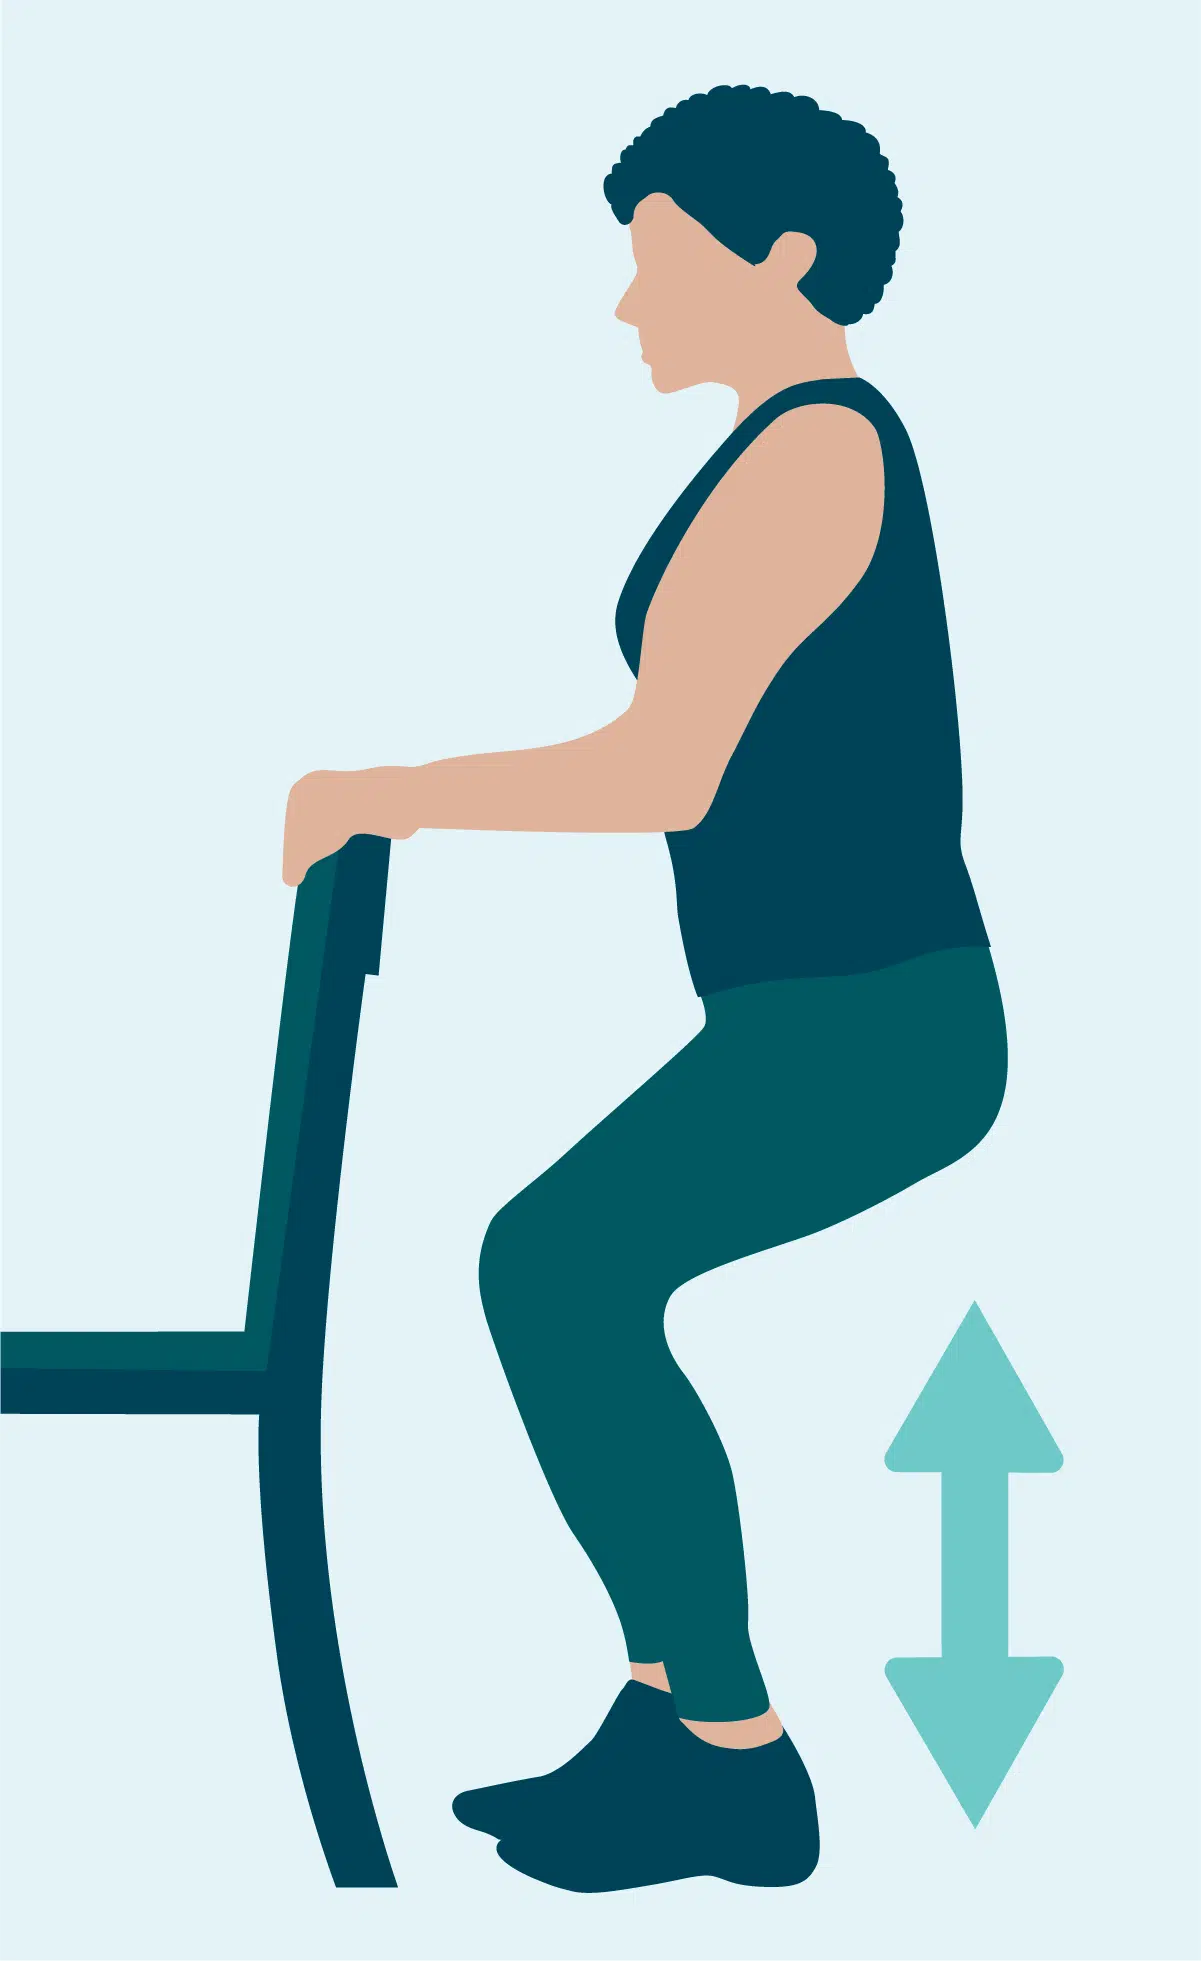 30 Min Home Exercise for Seniors, Elderly, & Older People - Seated Chair Exercise  Senior Workout 